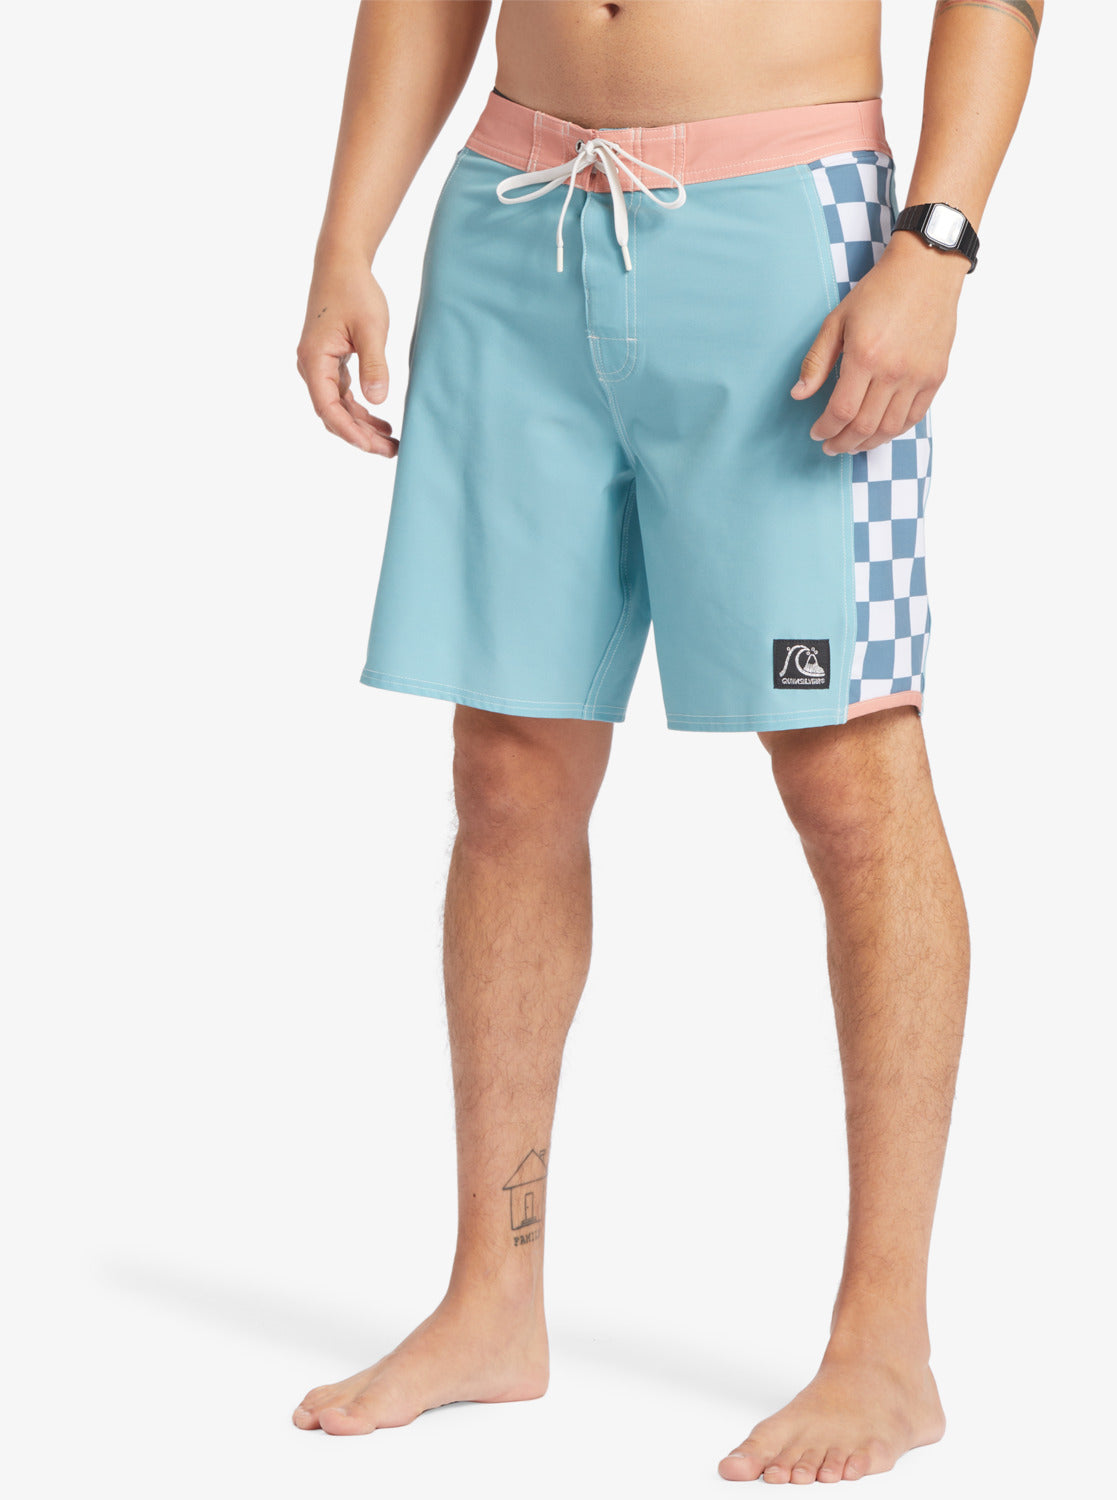 Quiksilver Original Arch 18" Boardshorts in reef waters colourway from side